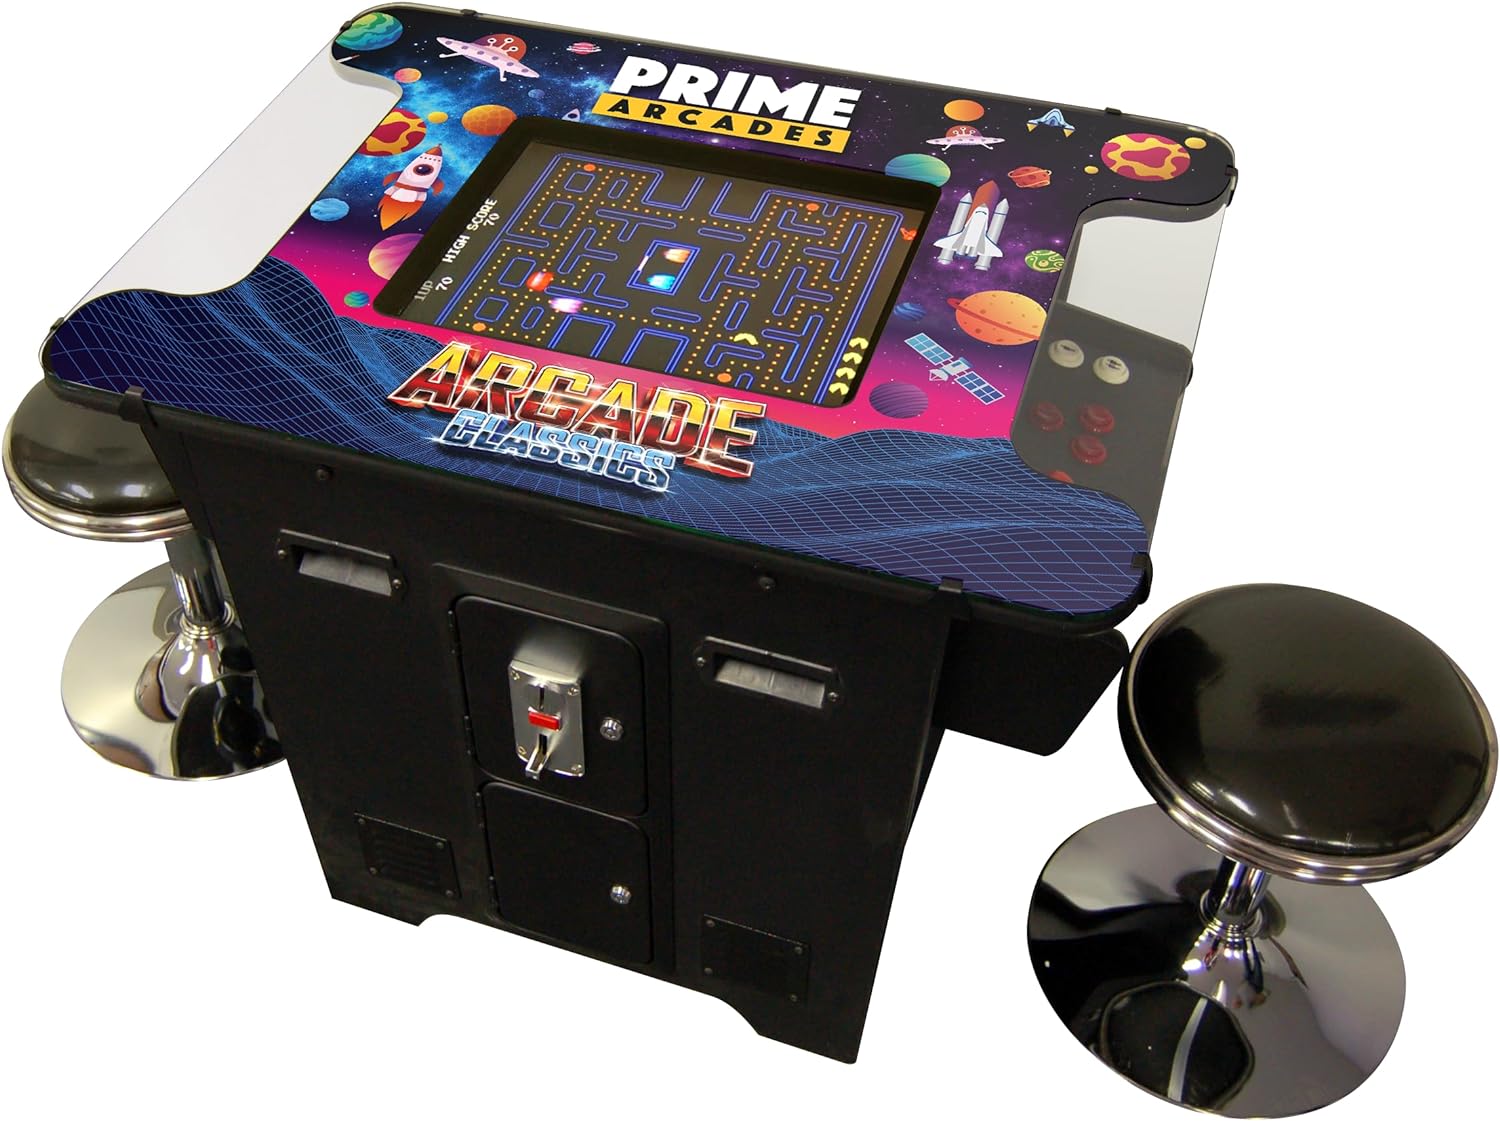 Prime Arcades Cocktail Arcade Machine 412 Games in 1 with stools